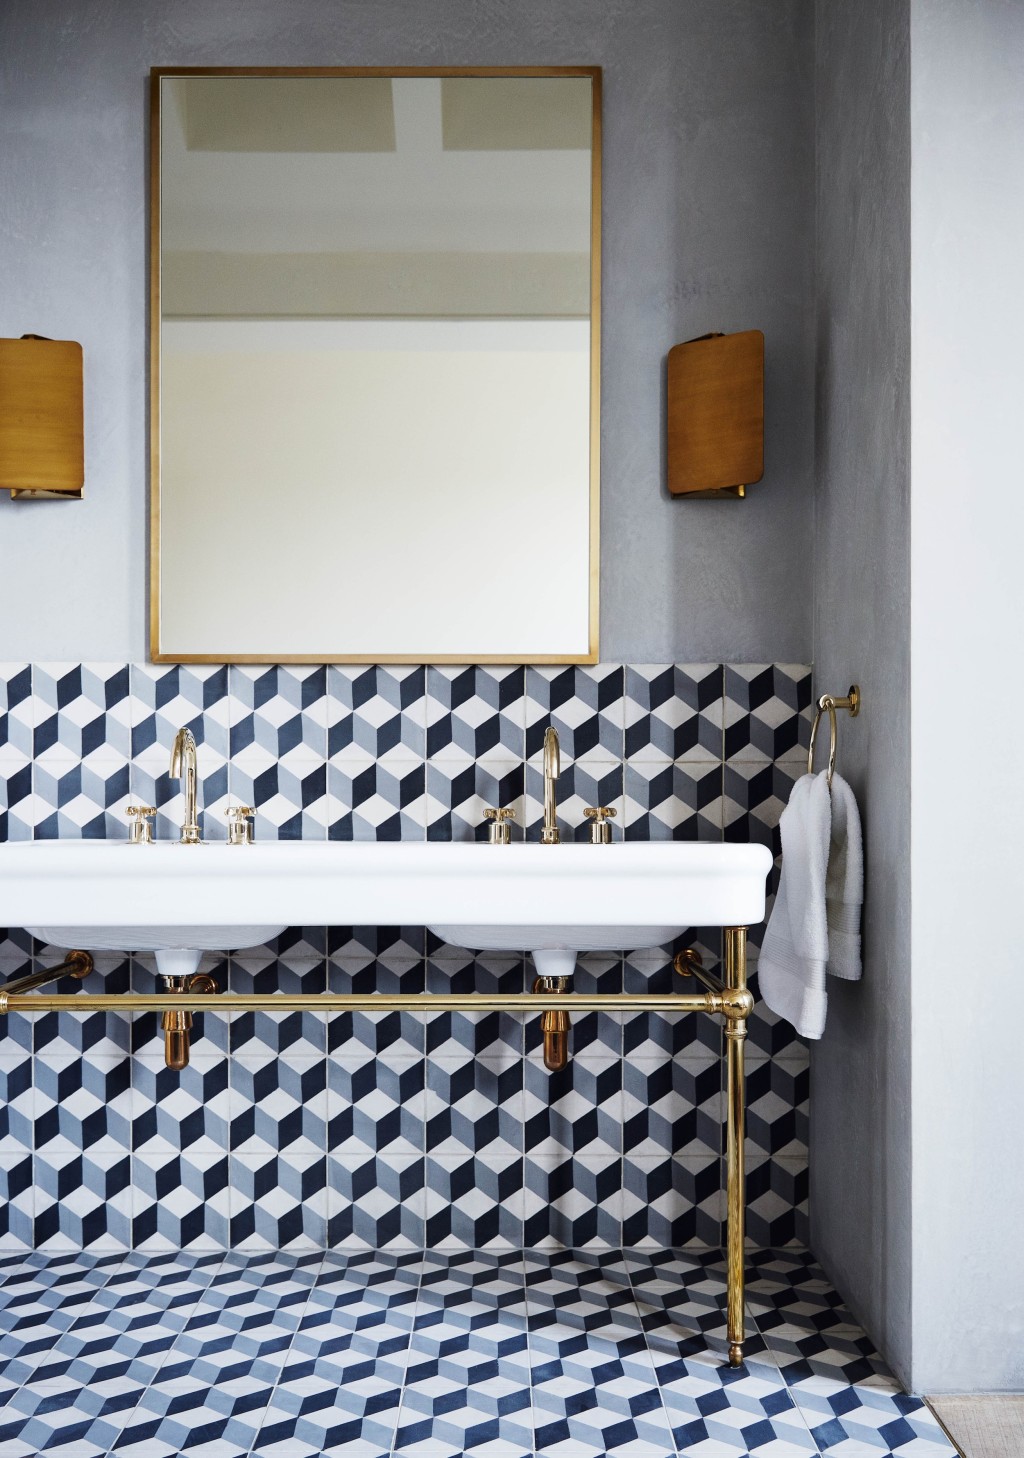 Feature, Notting Hill town house, contemporary, modern, graphic, geometric patterns, family home, bright, interior, bathroom, basins, brass taps, tiles